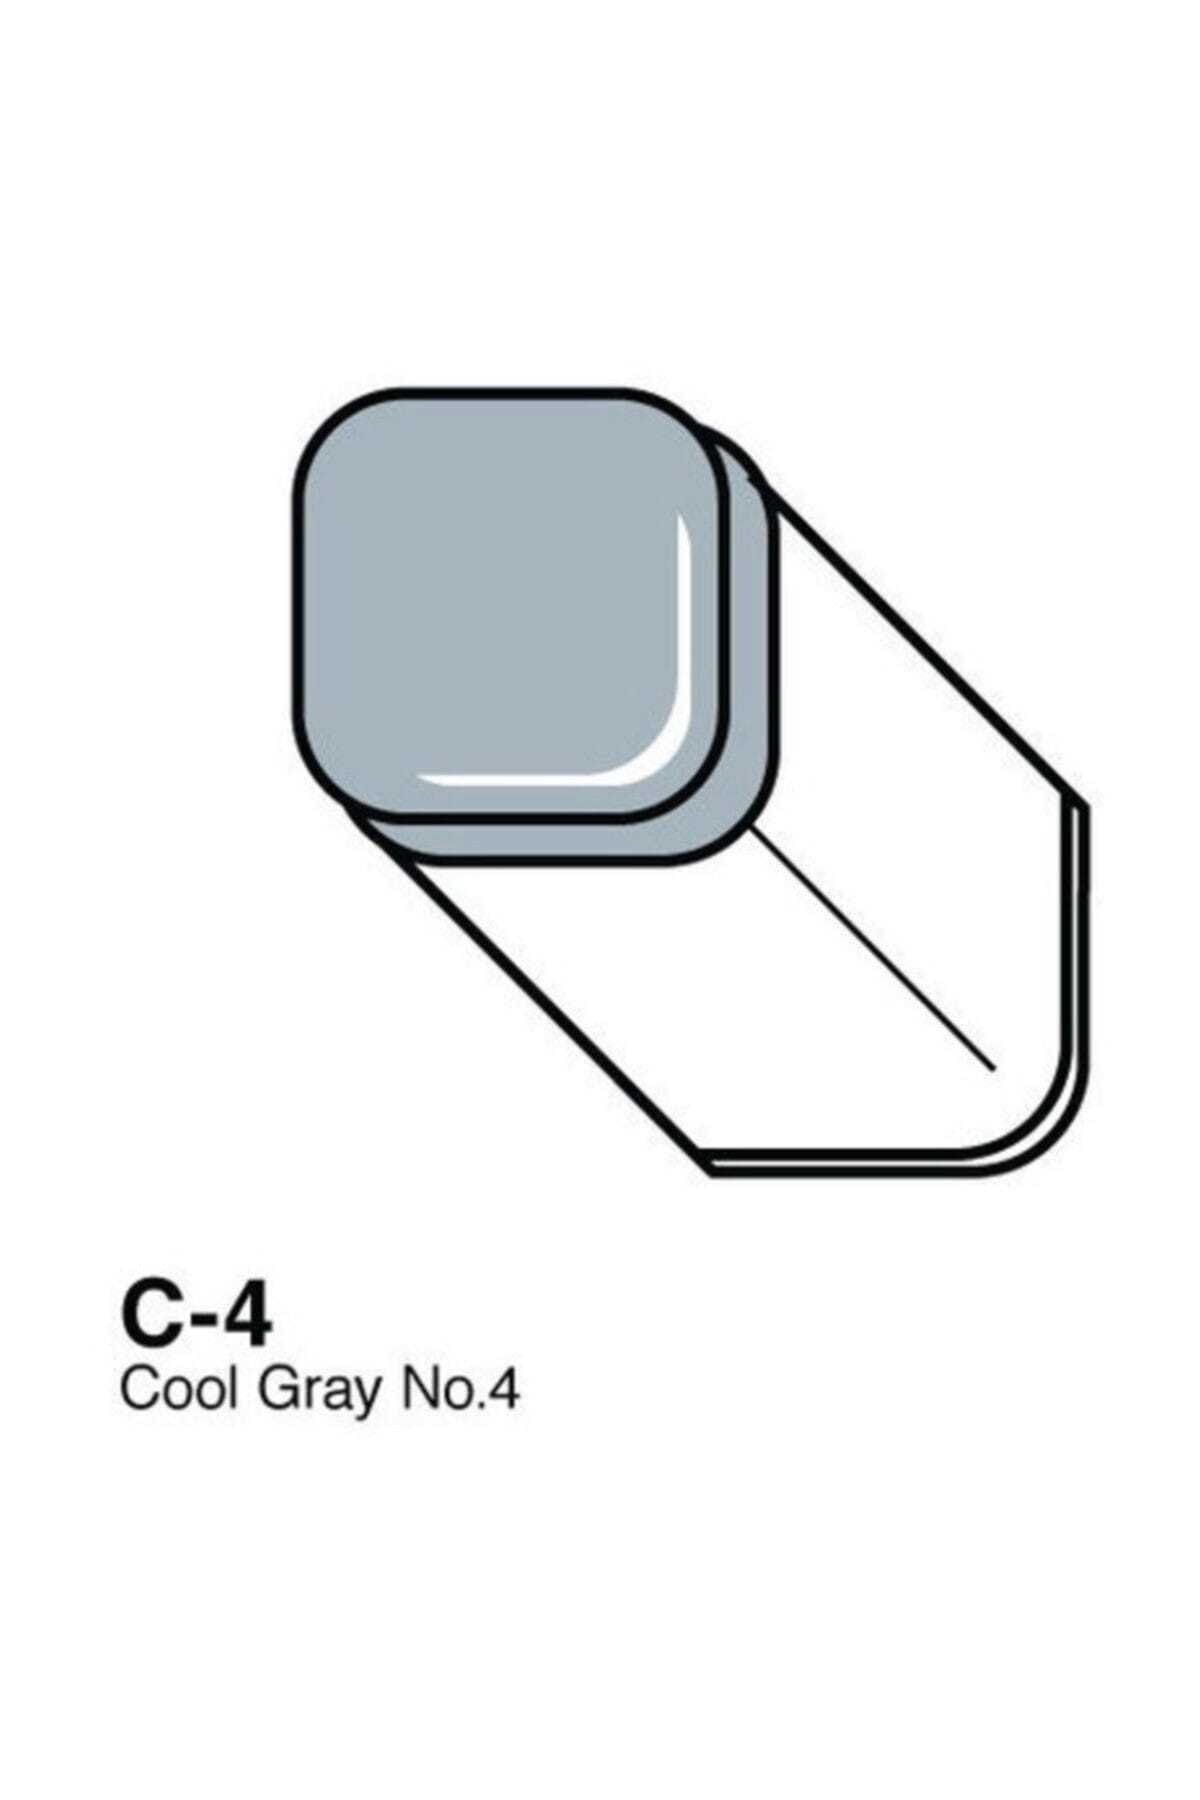 copic Classic Marker N:C4 Cool Gray